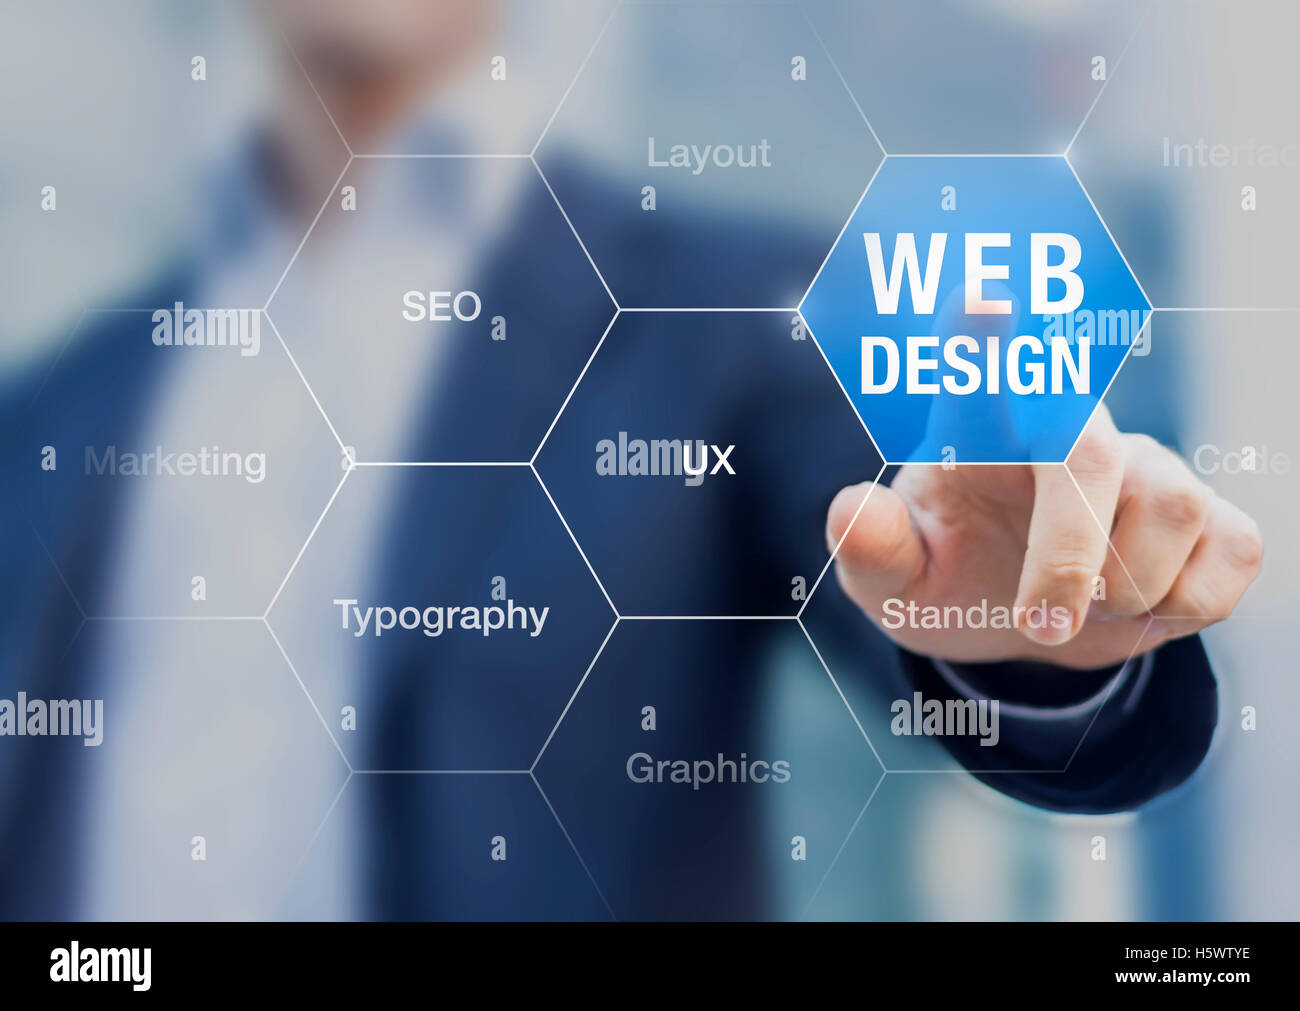 Web design teacher presenting internet development skills such as layout, user experience and marketing Stock Photo